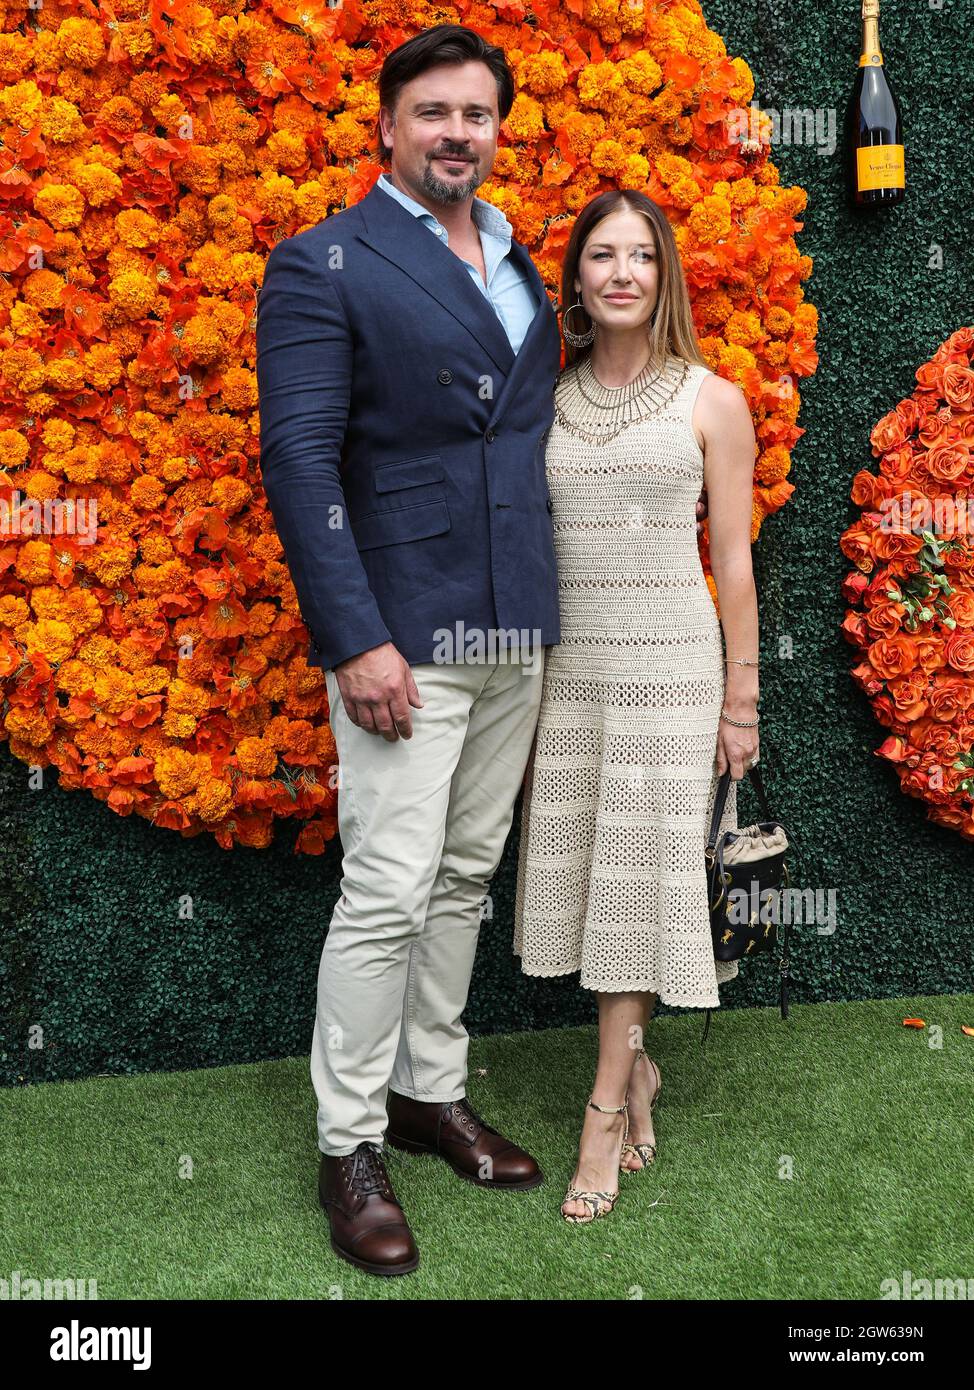 Pacific Palisades, United States. 02nd Oct, 2021. PACIFIC PALISADES, LOS ANGELES, CALIFORNIA, USA - OCTOBER 02: Actor Tom Welling and wife Jessica Rose Lee Welling arrive at the Veuve Clicquot Polo Classic Los Angeles 2021 held at the Will Rogers State Historic Park on October 2, 2021 in Pacific Palisades, Los Angeles, California, United States. (Photo by Xavier Collin/Image Press Agency) Credit: Image Press Agency/Alamy Live News Stock Photo